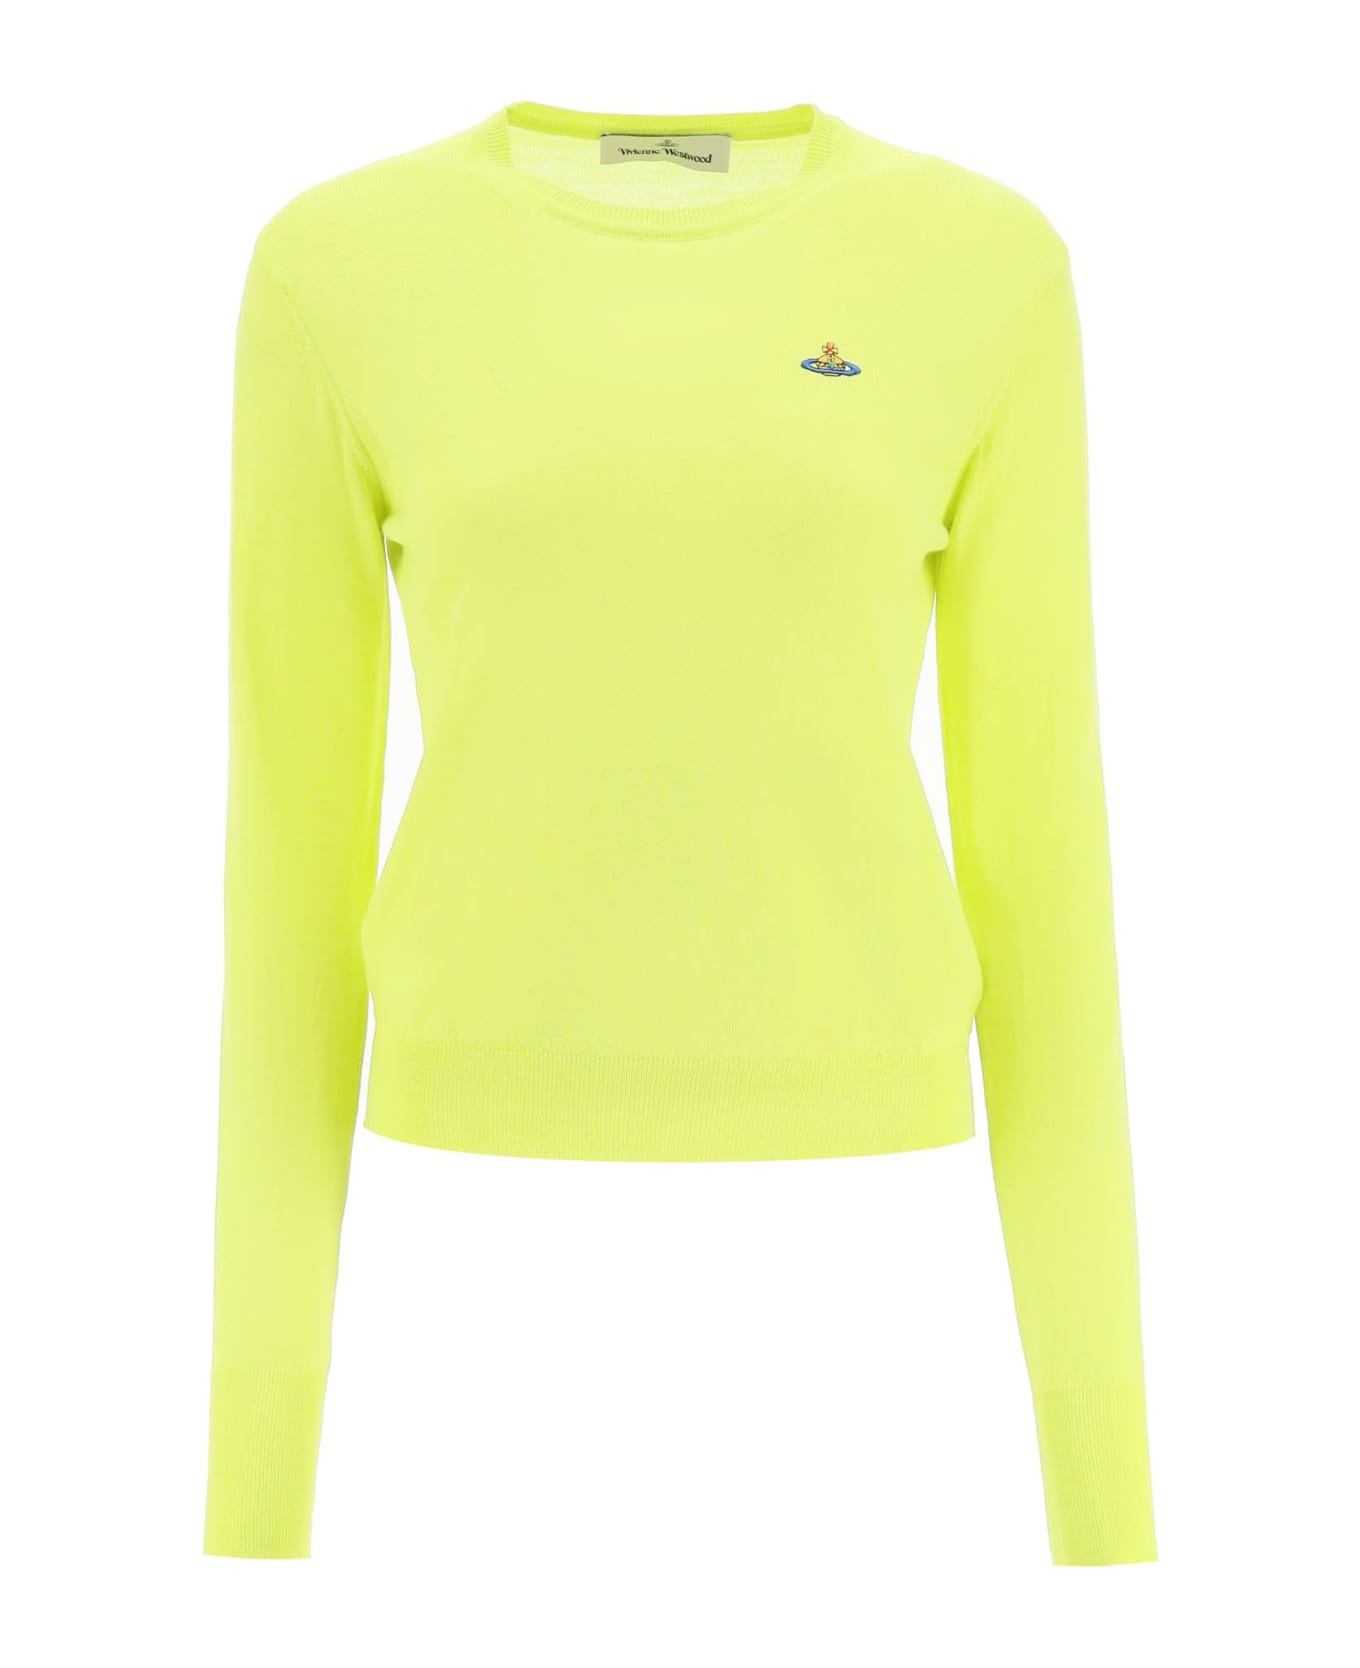 Vivienne Westwood Orb Embroidery Sweater - NEON YELLOW (Yellow)